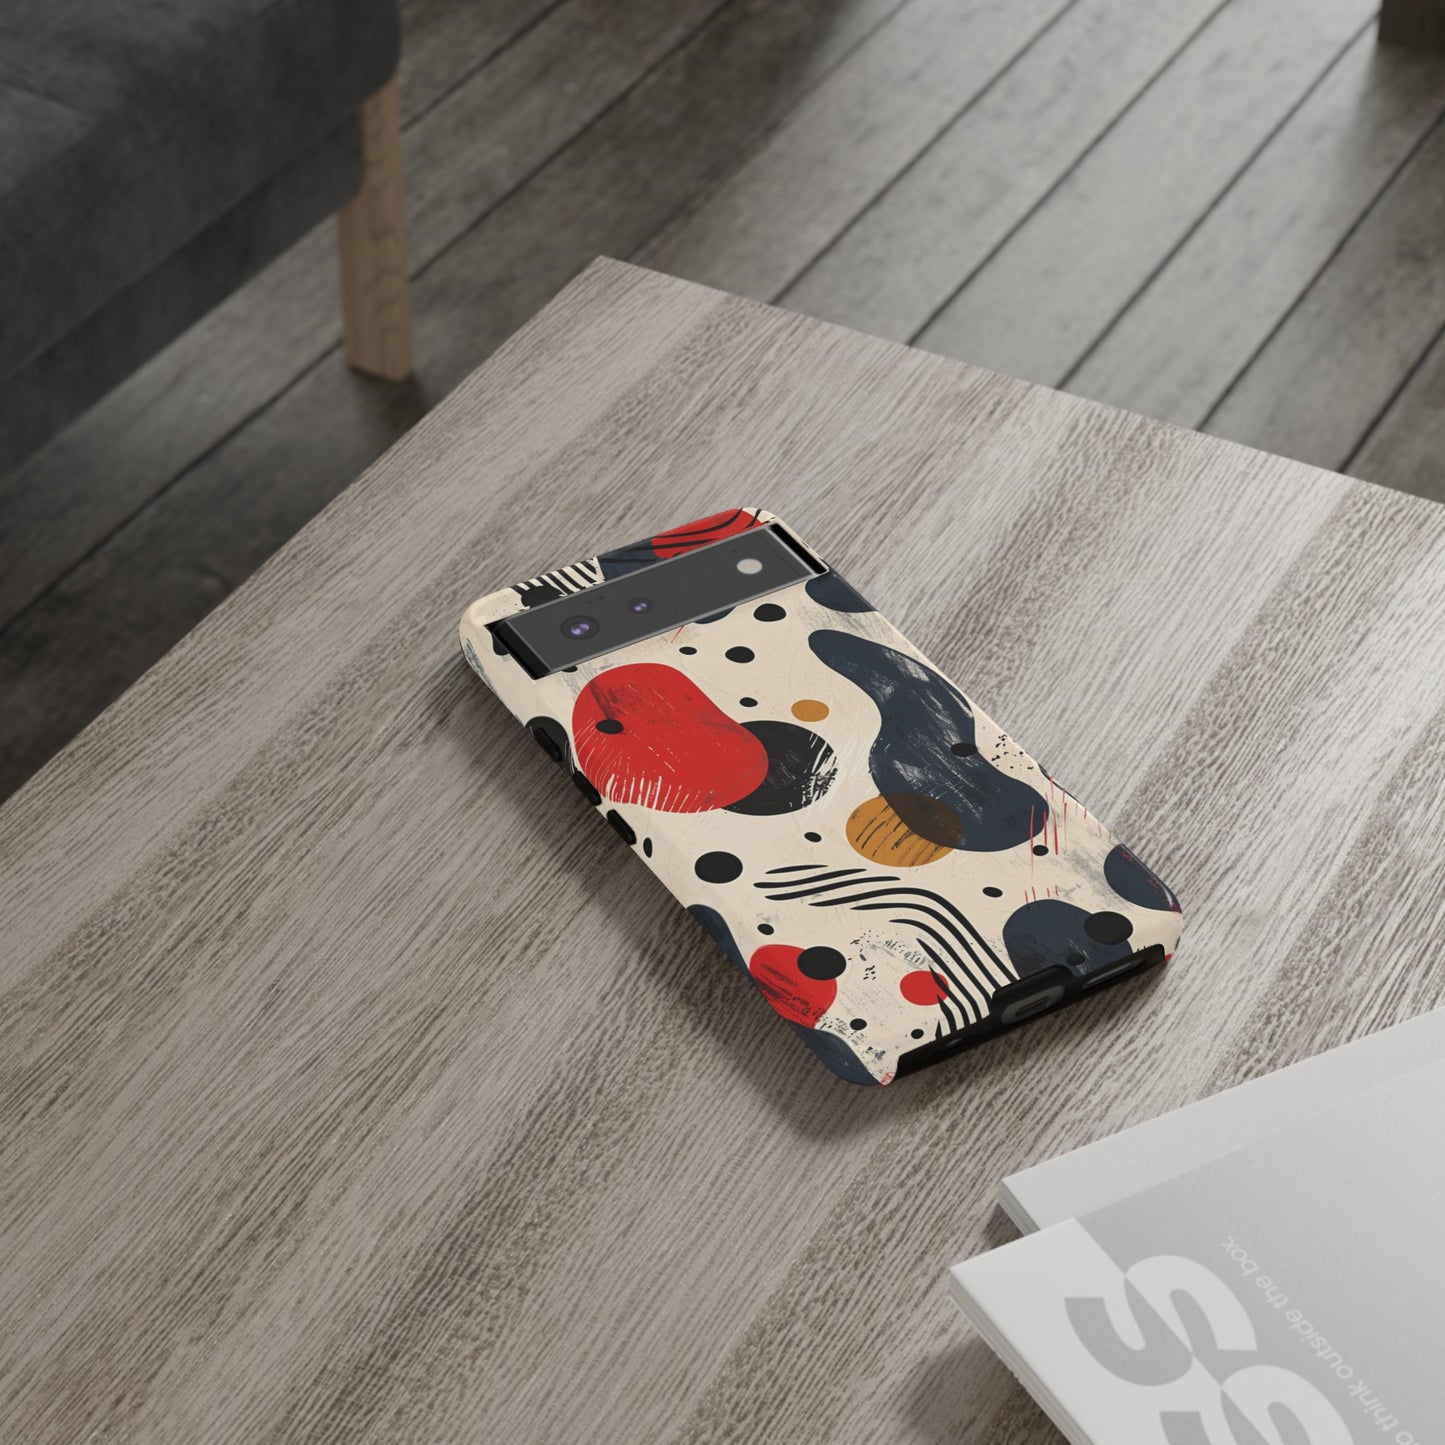 Abstract Shapes Phone Case